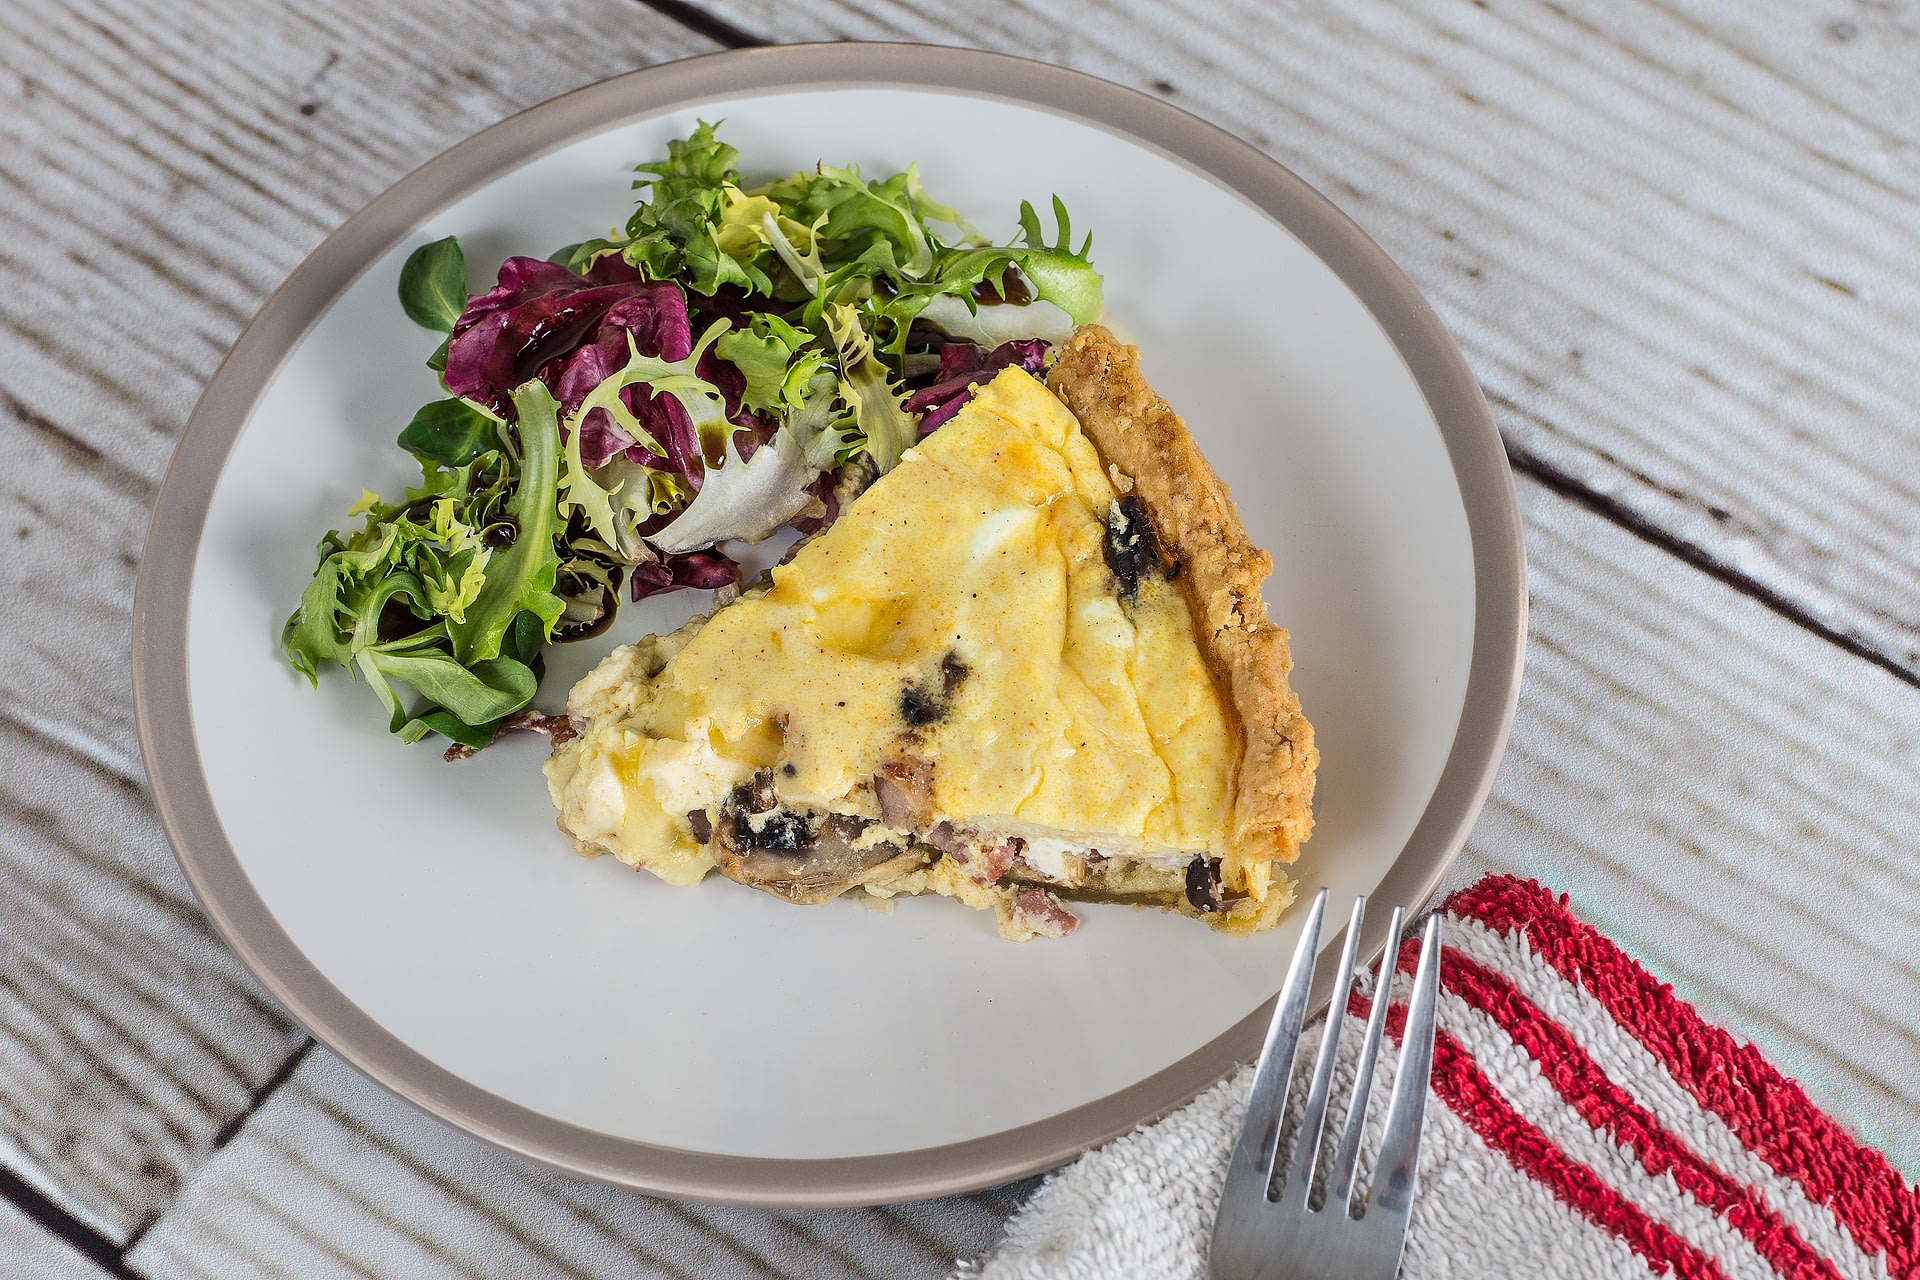 Quiche and salad, a healthy brunch recipe